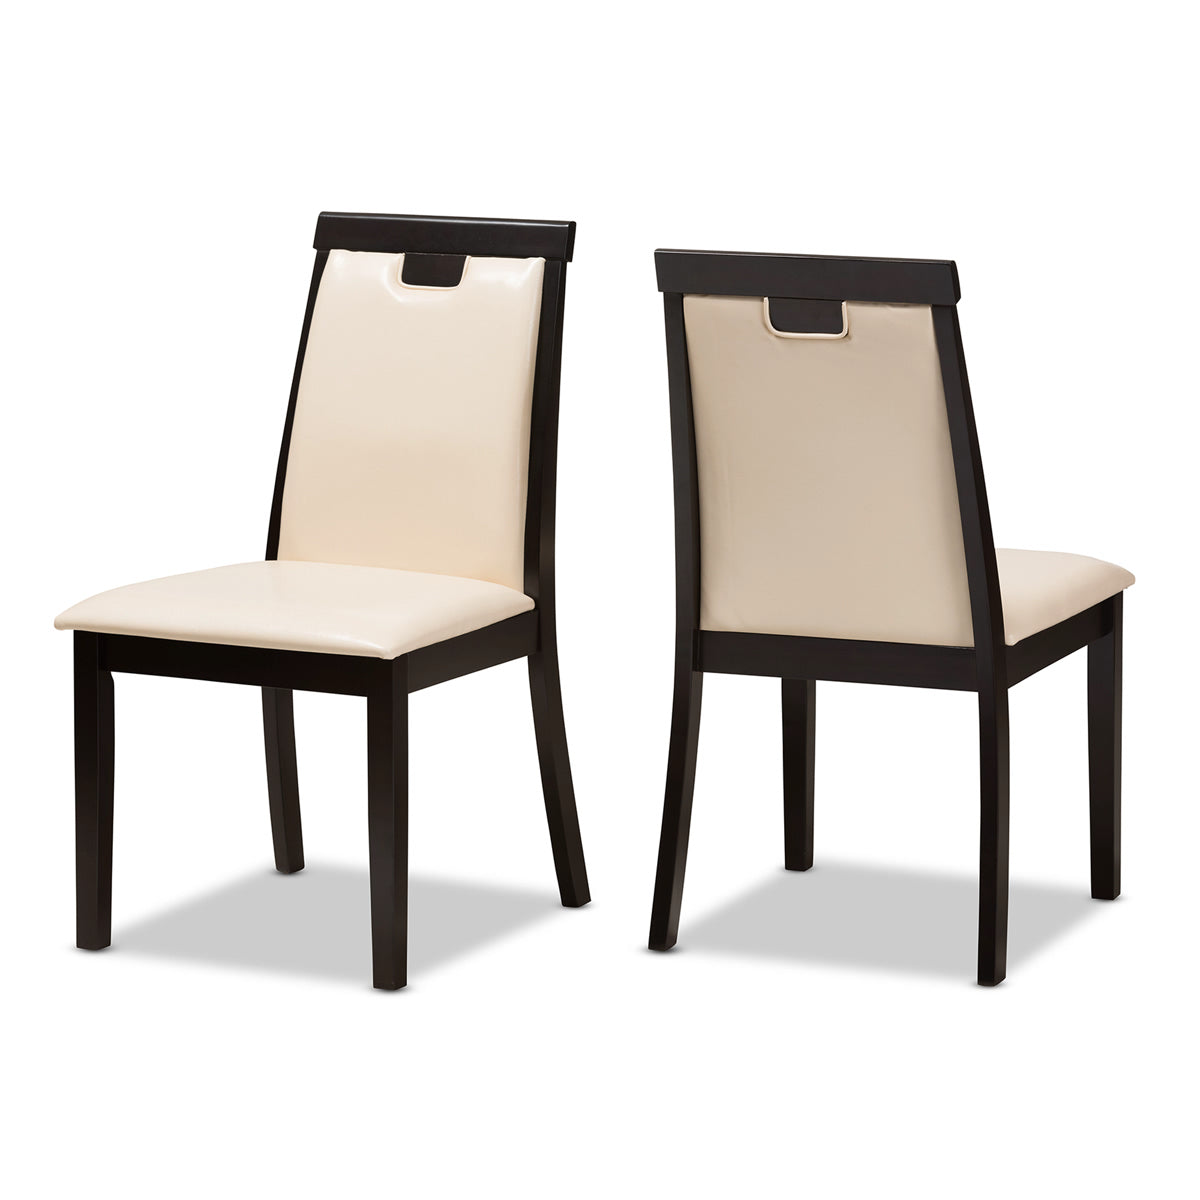 Baxton Studio Evelyn Modern and Contemporary Beige Faux Leather Upholstered and Dark Brown Finished Dining Chair (Set of 2) Baxton Studio-dining chair-Minimal And Modern - 1